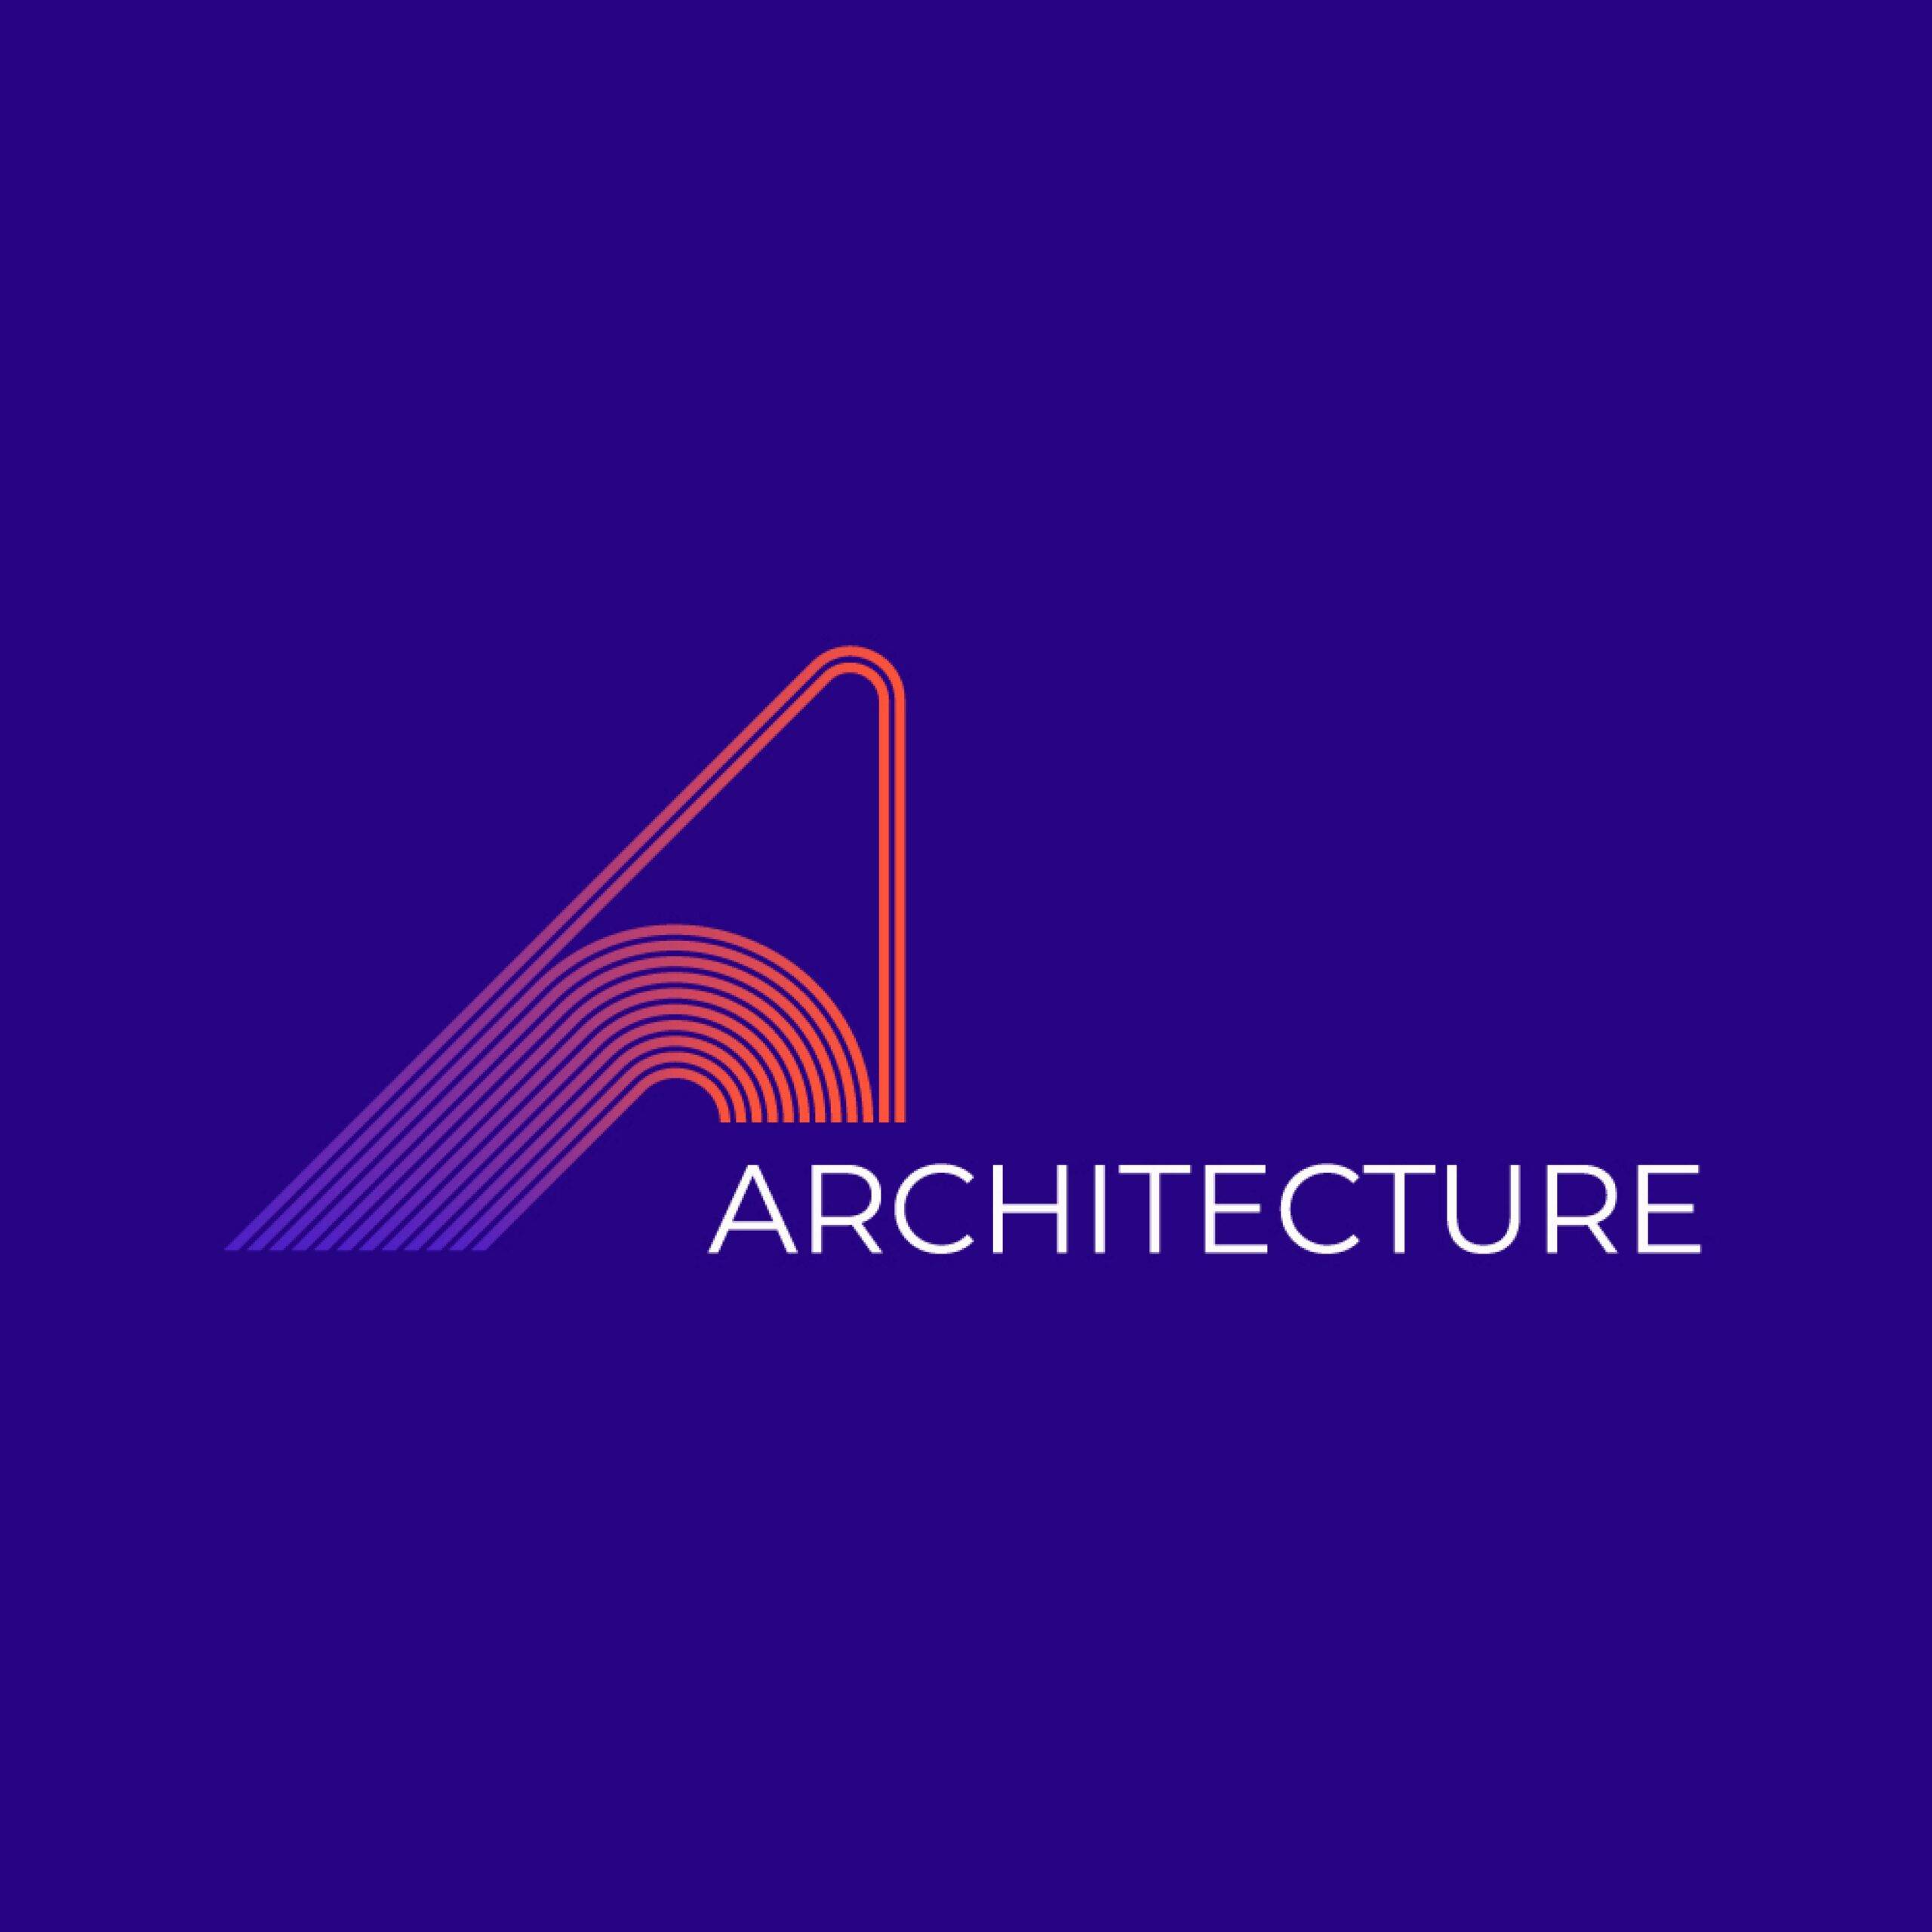 Architecture logo design template with gradient